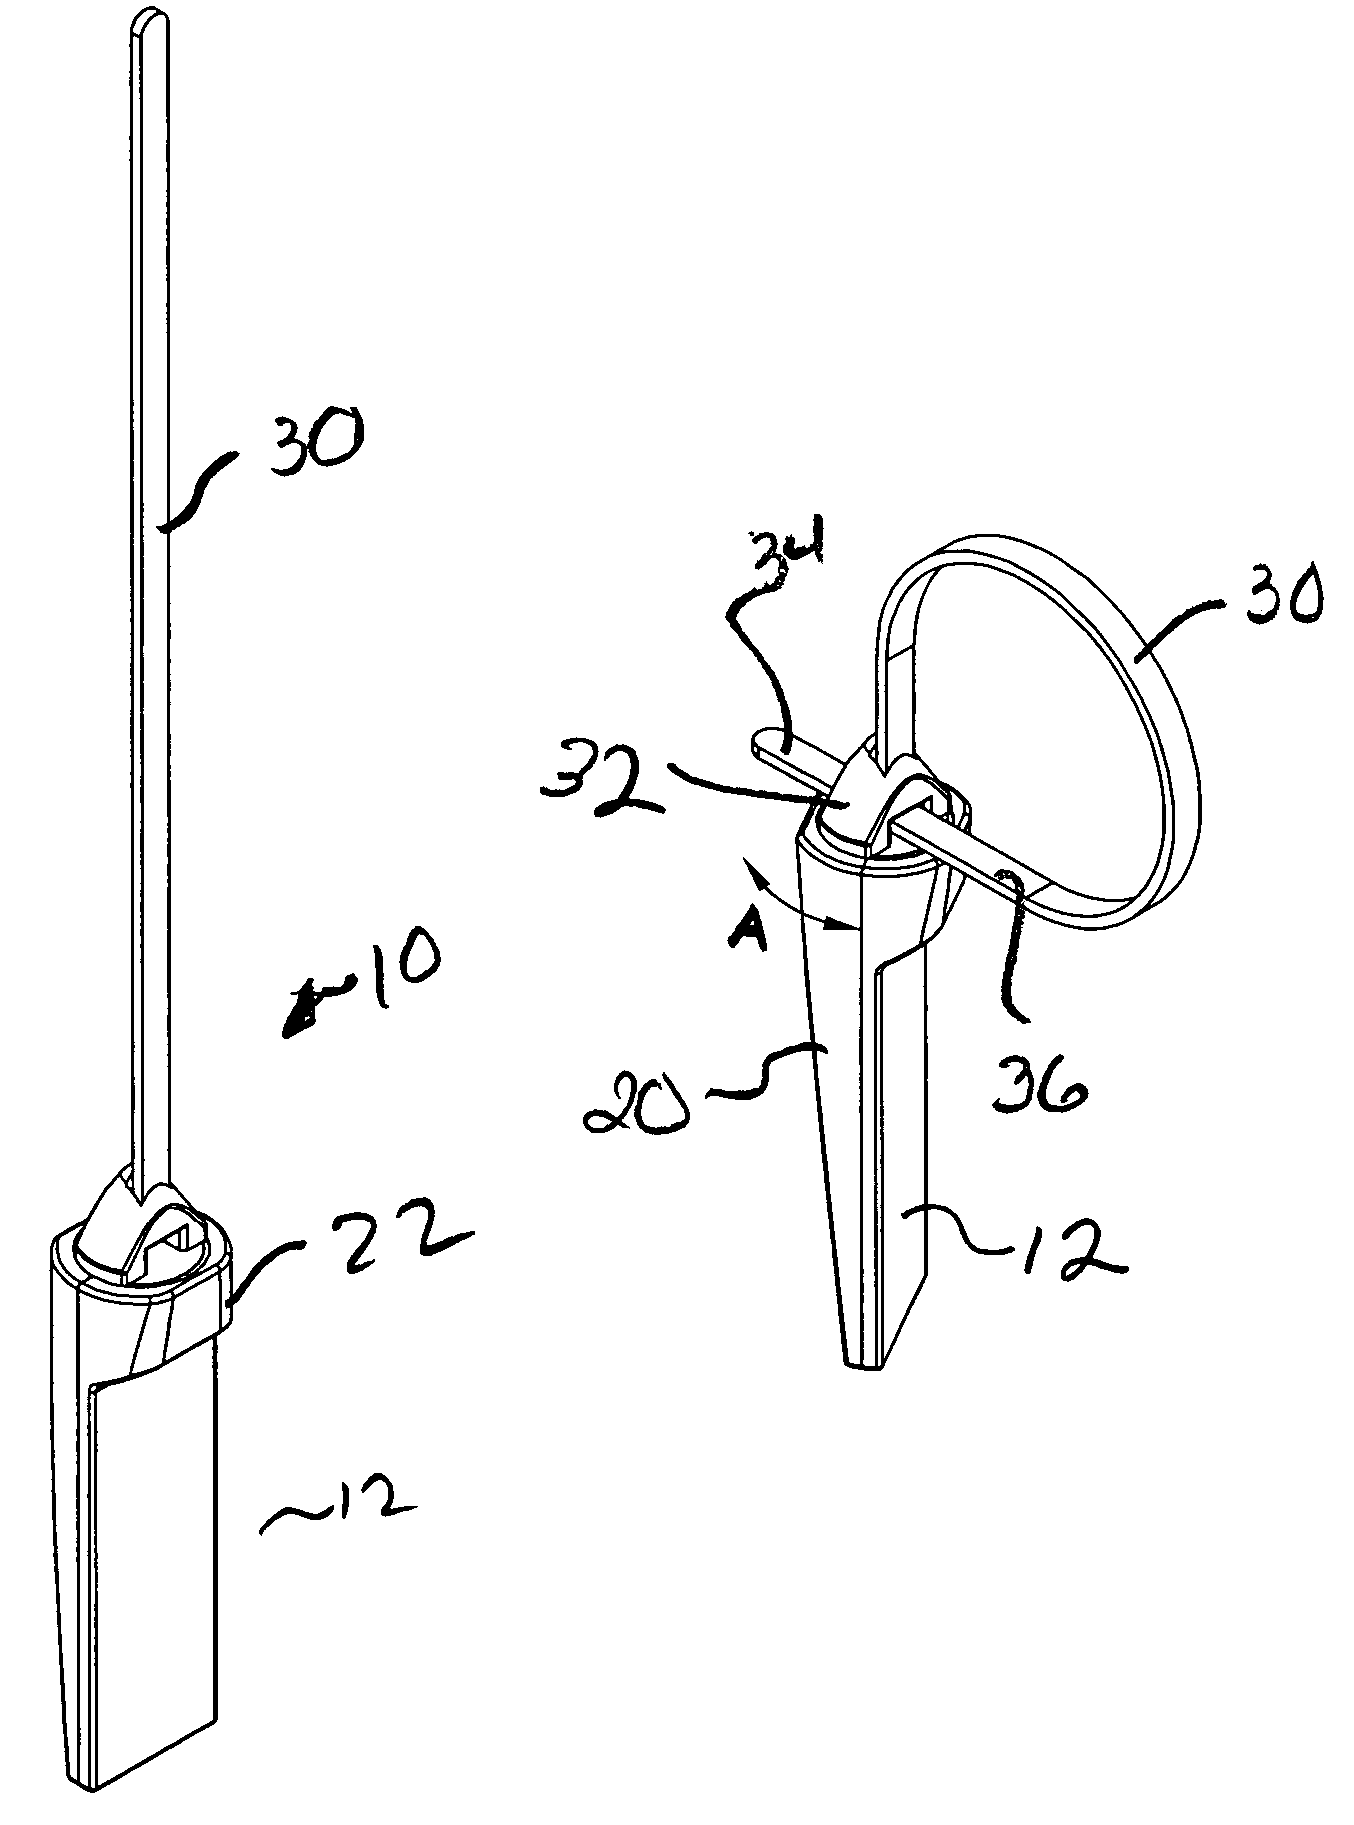 Hang tag with swivel attachment